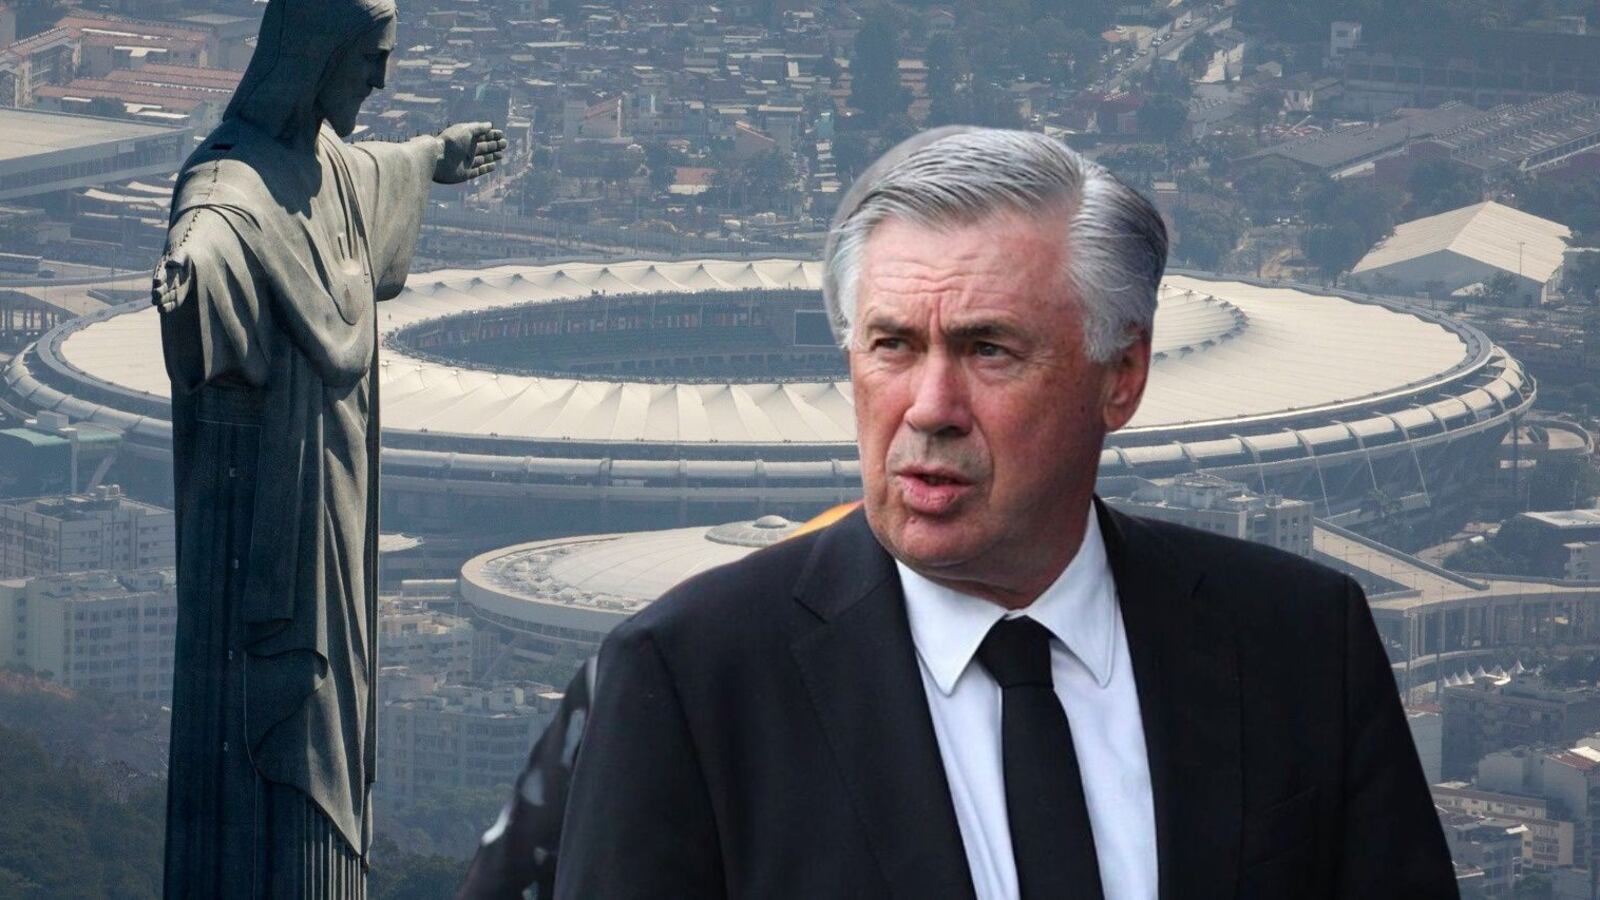 It's not Brazil or Madrid, the unexpected destination that Ancelotti would have that surprises